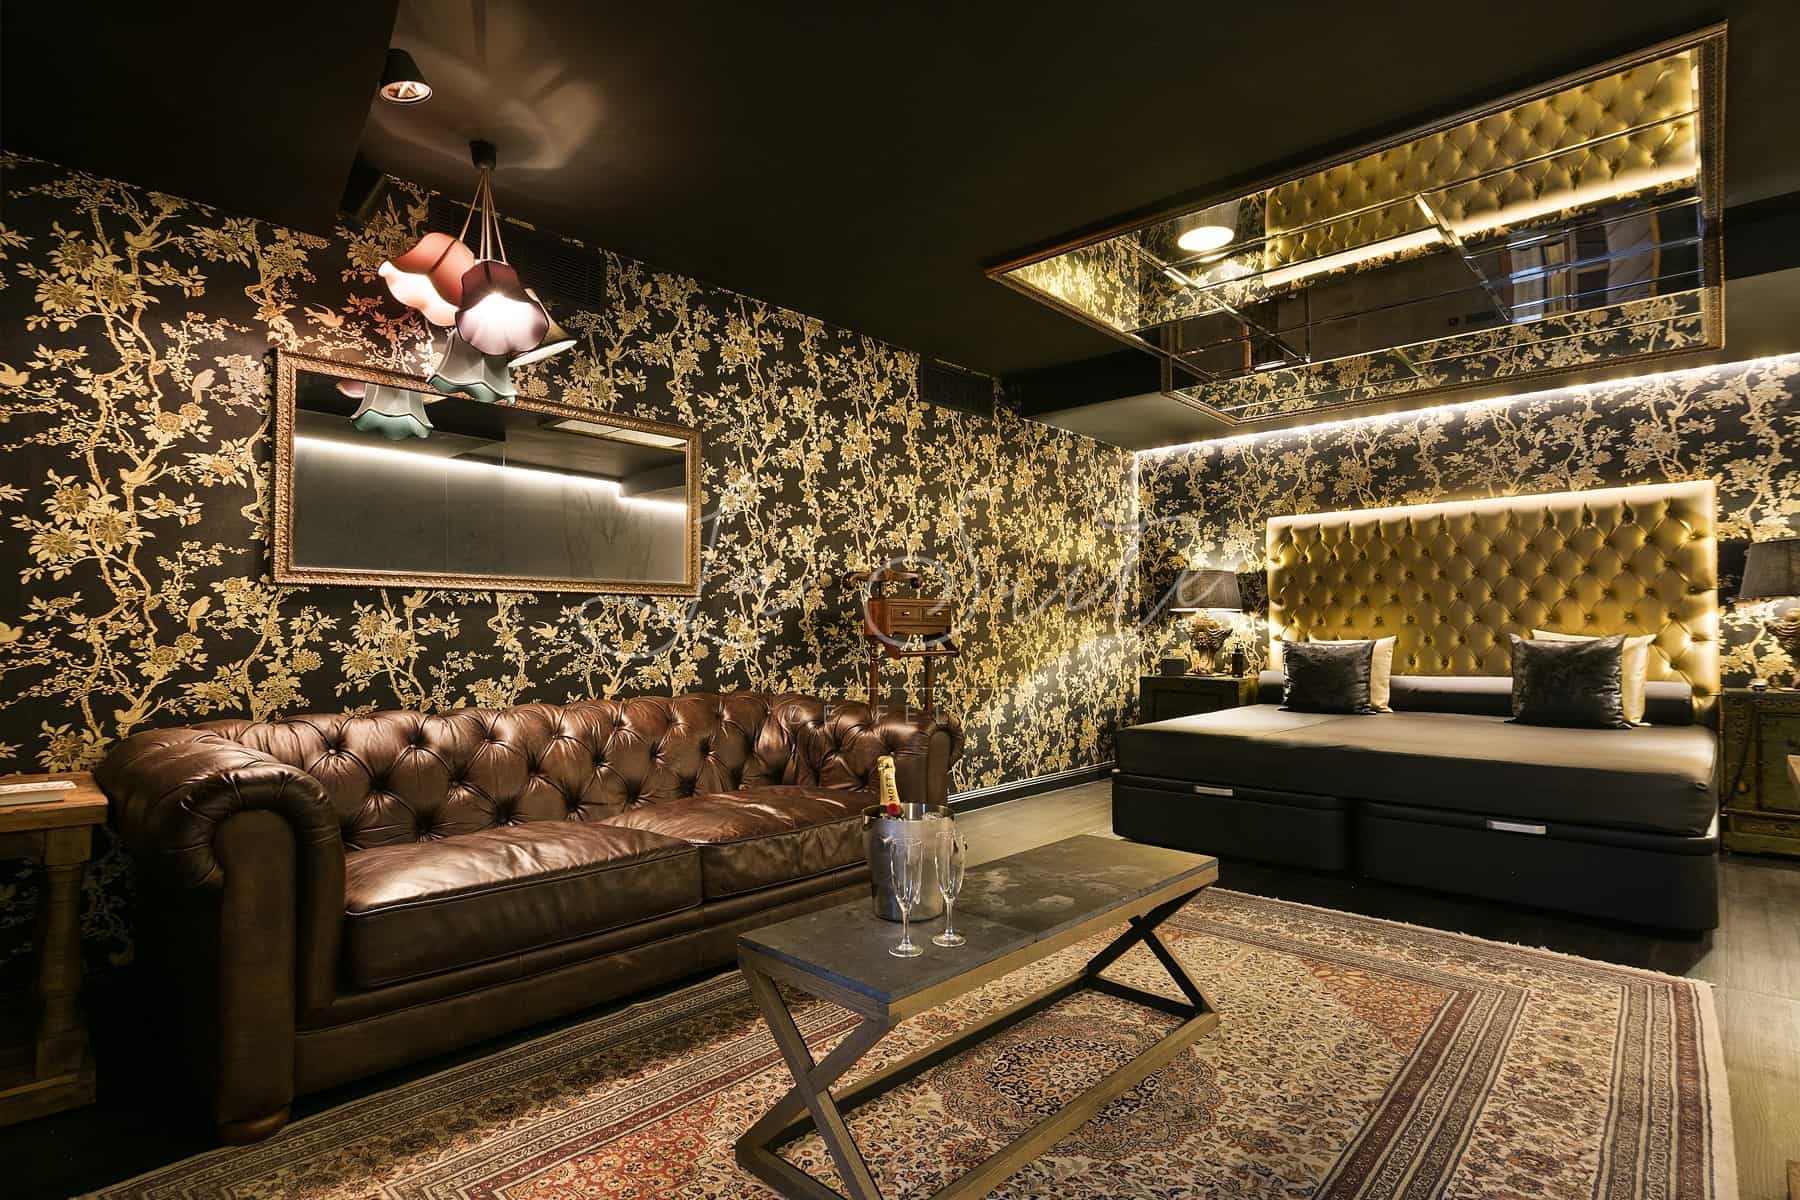 Suite Lujuria, decorated in gold and wood finishes, furnished with the highest quality at La Suite, Barcelona